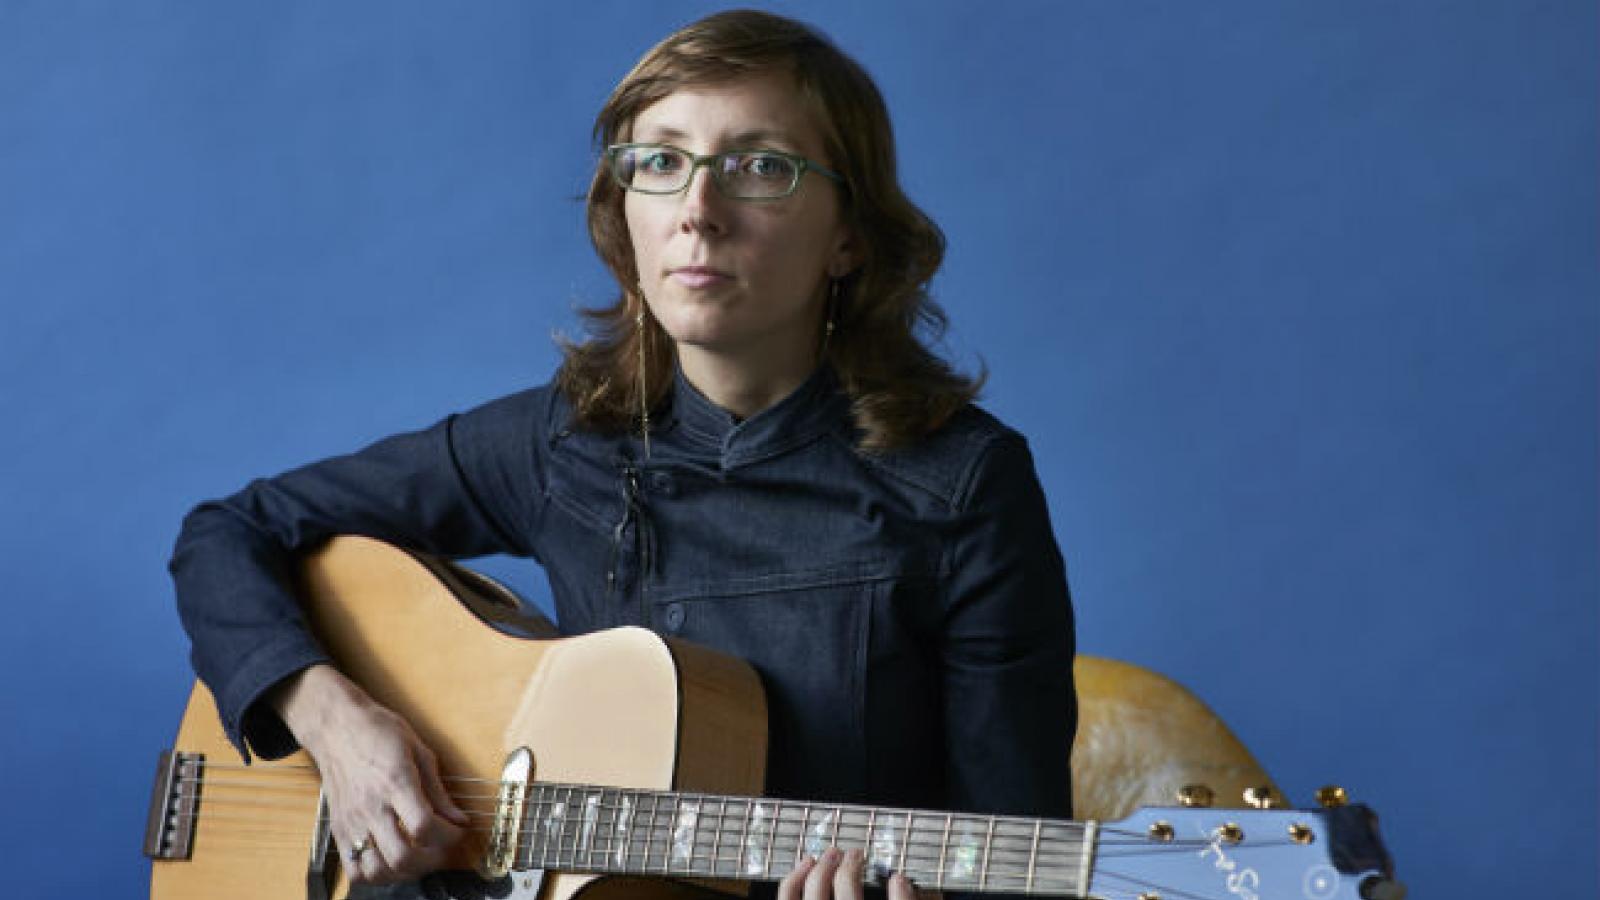 Woman in glasses holding a guitar